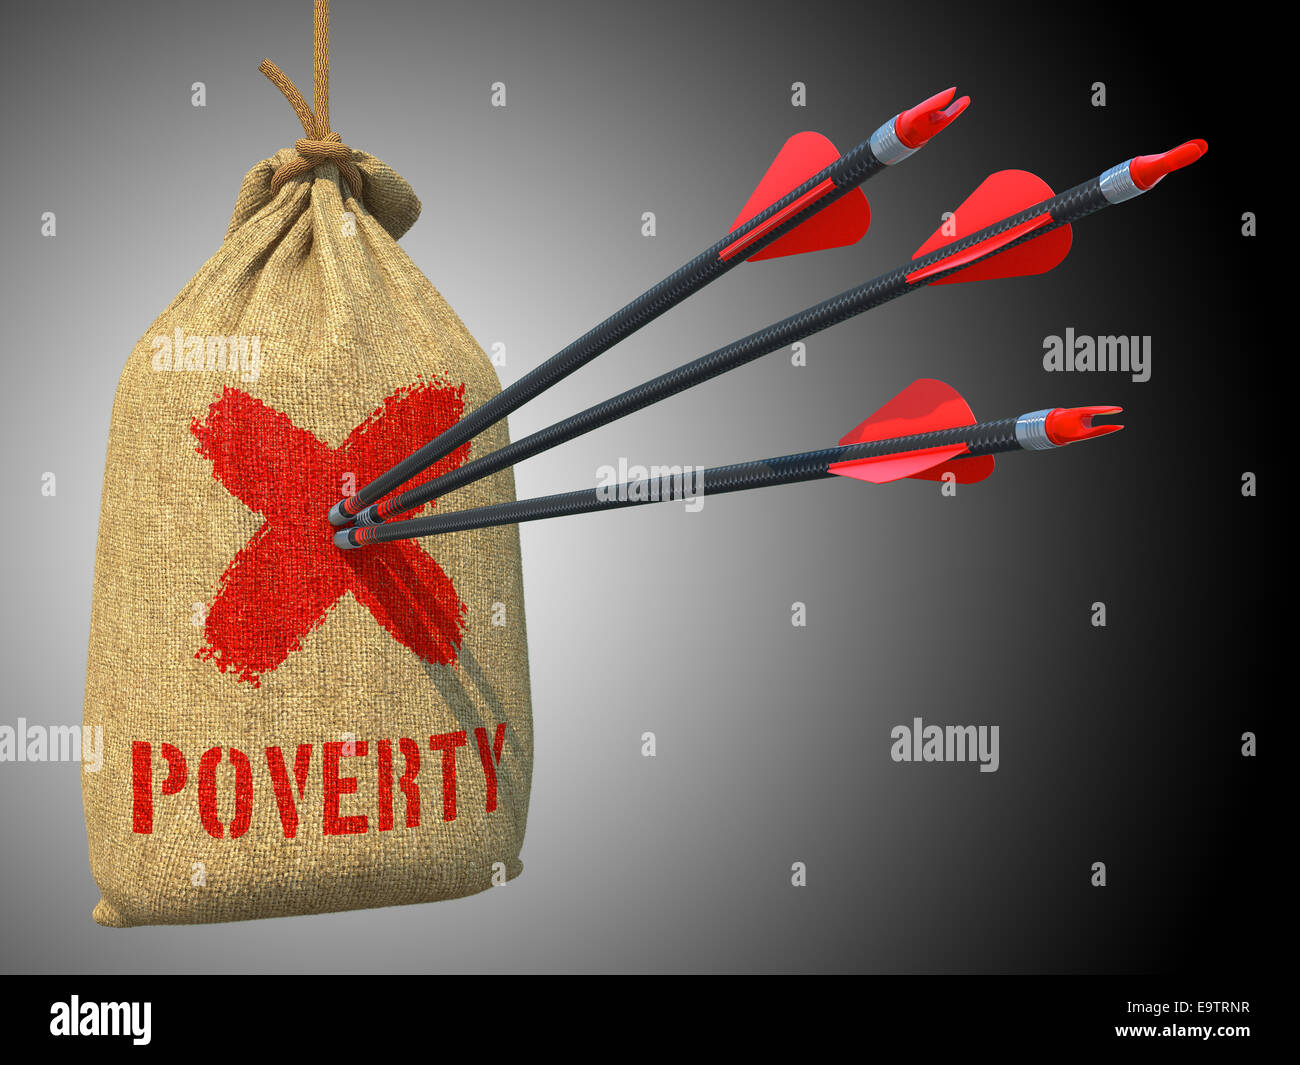 Property - Three Arrows Hit in Red Target on a Hanging Sack on Green Bokeh Background. Stock Photo